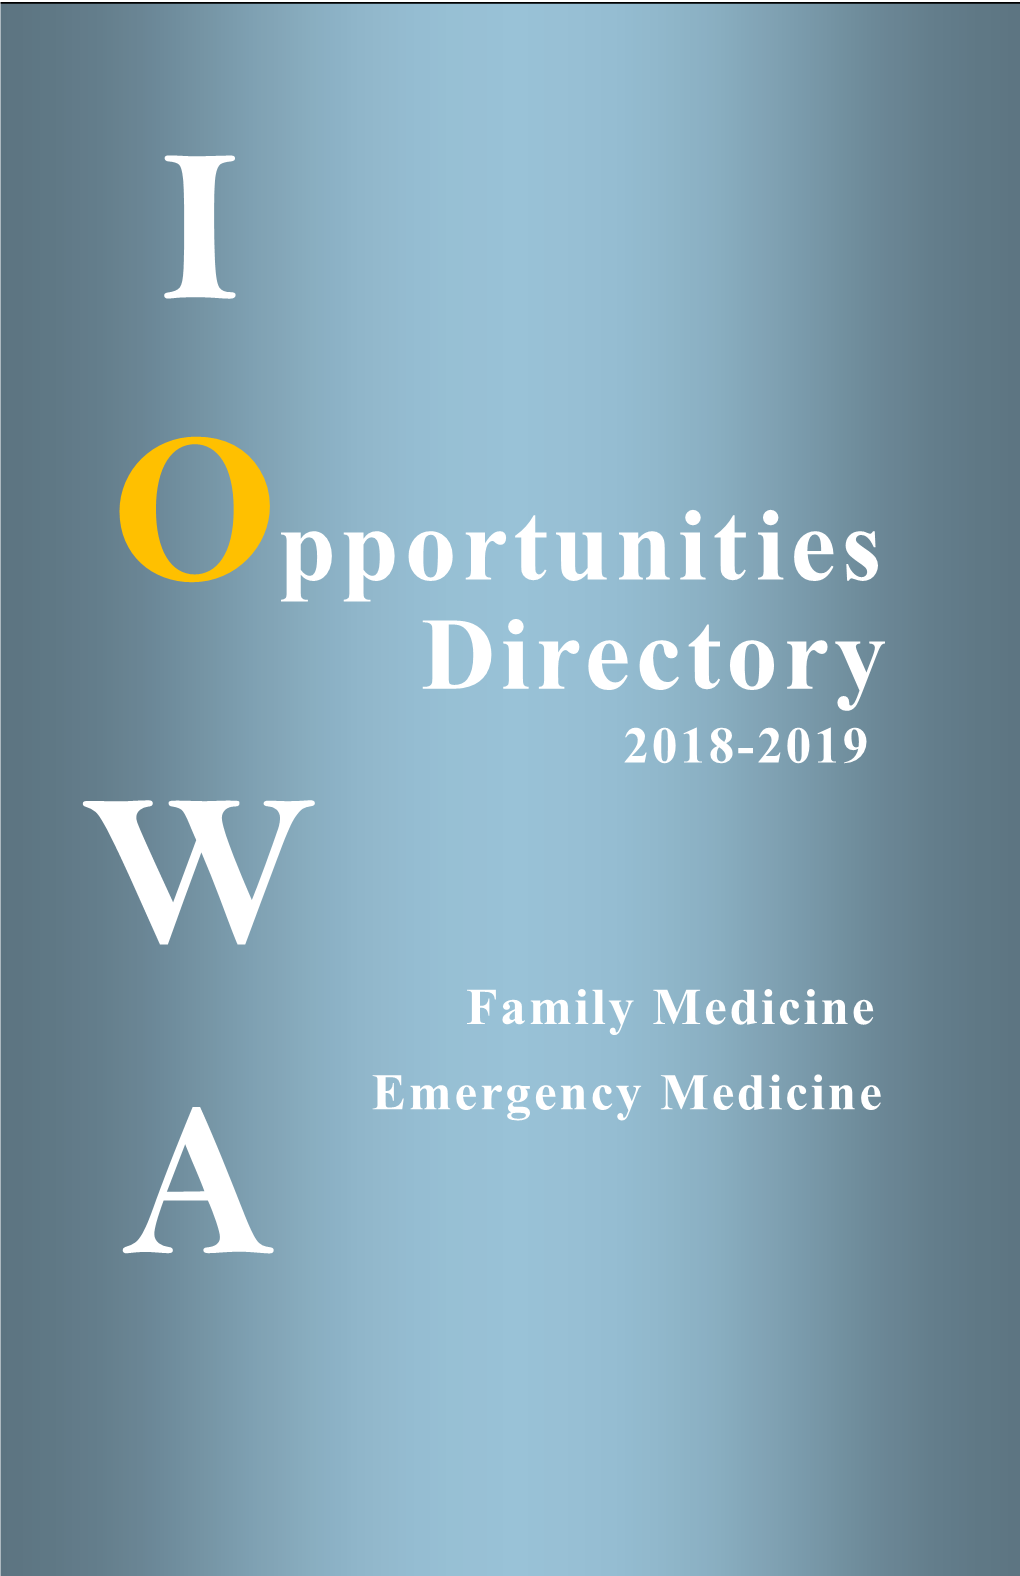 Opportunities Directory 2018-2019 W Family Medicine a Emergency Medicine IOWA Opportunities Directory